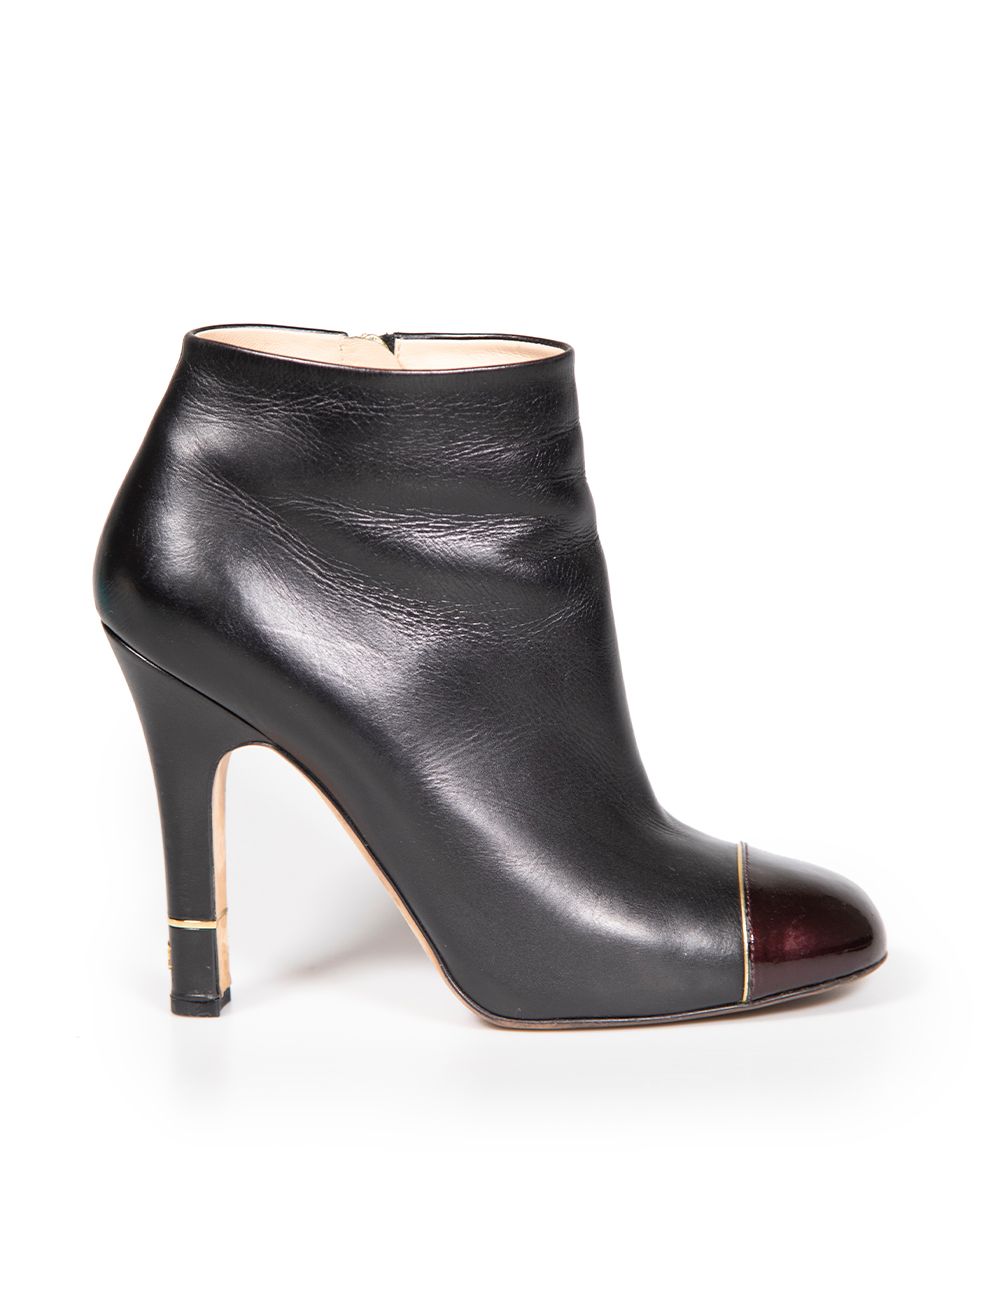 Chanel Black Leather Cap Toe CC Ankle Boots